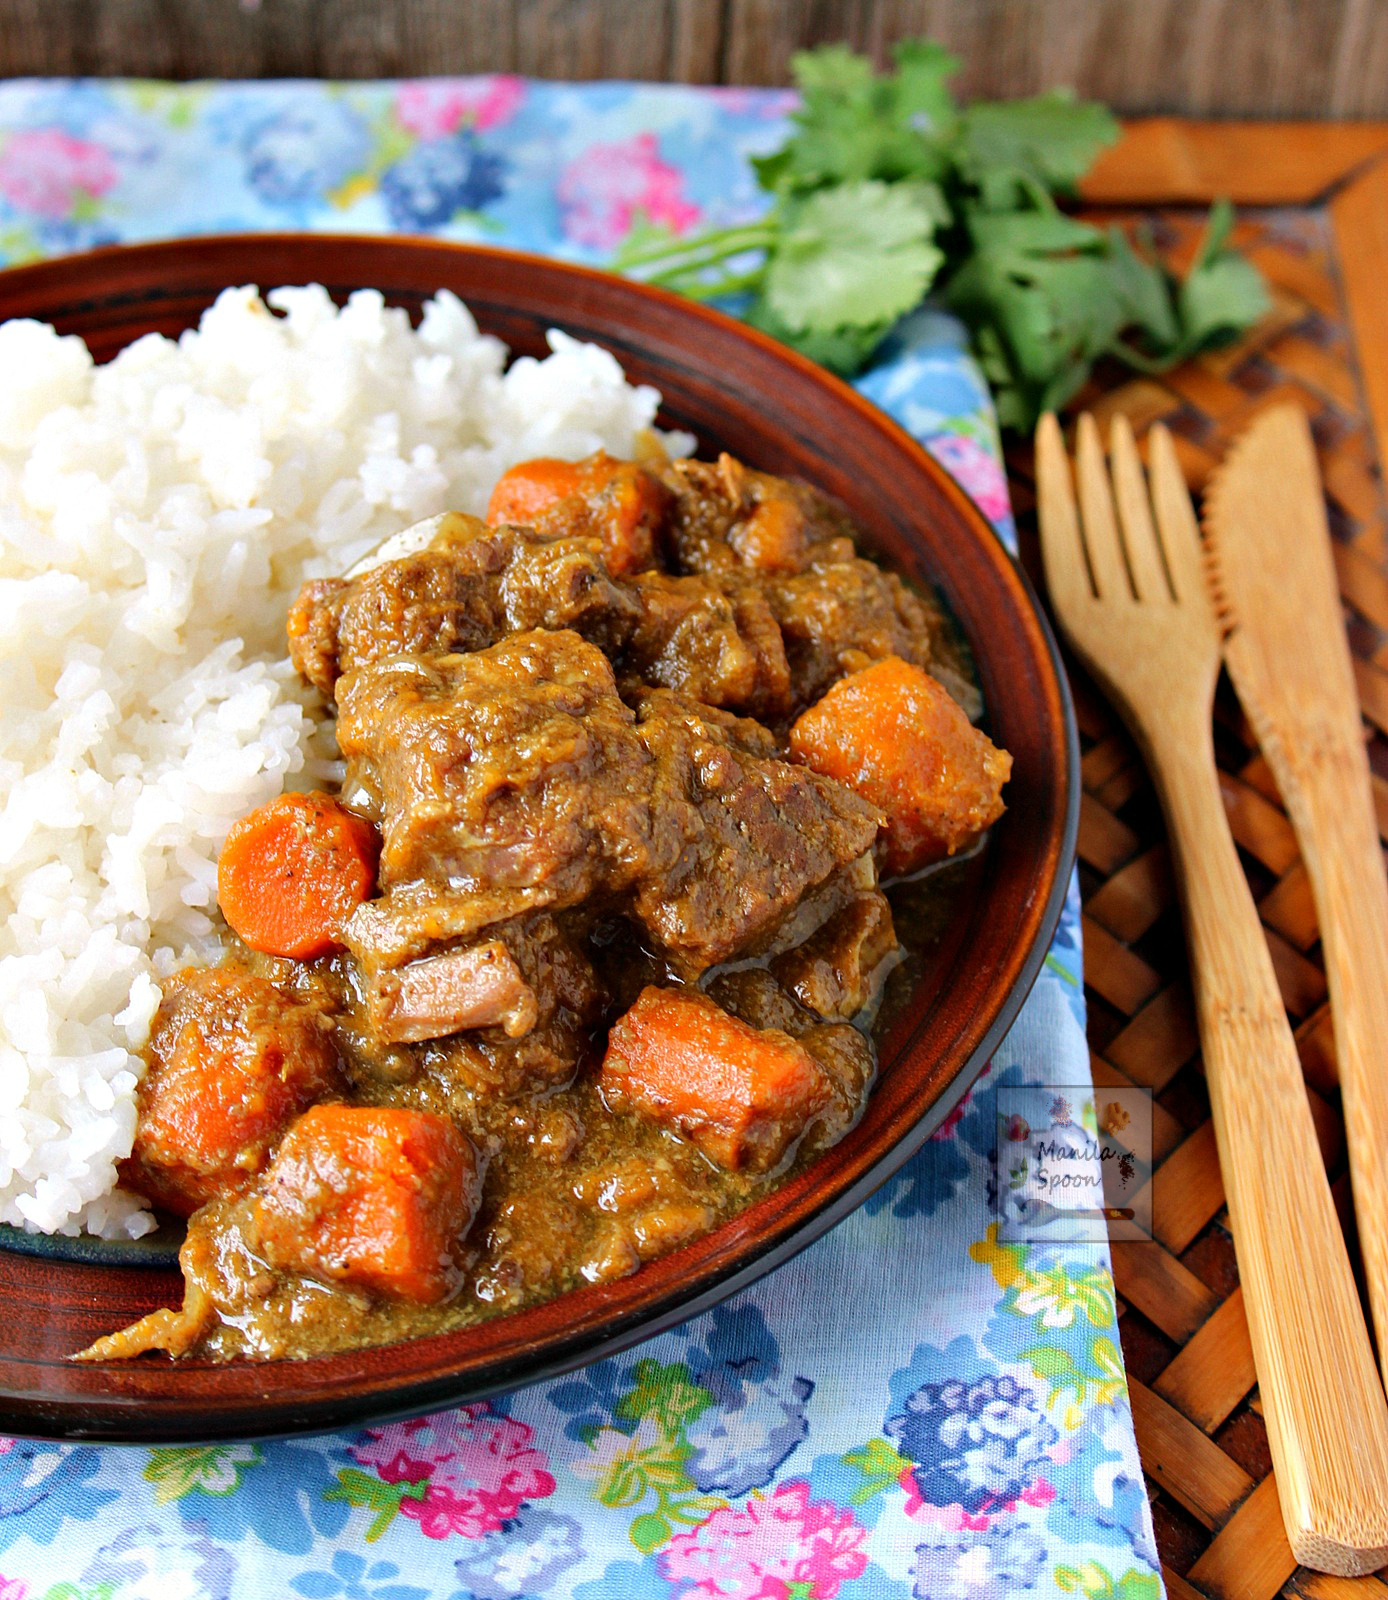 A hearty slow cooker stew with melt-in-your-mouth tender beef chunks in creamy coconut sauce flavored with curry powder and other spices. SLOW COOKER COCONUT CURRY BEEF STEW - deliciousness in every mouthful! #slowcooker #coconut #beef #curry